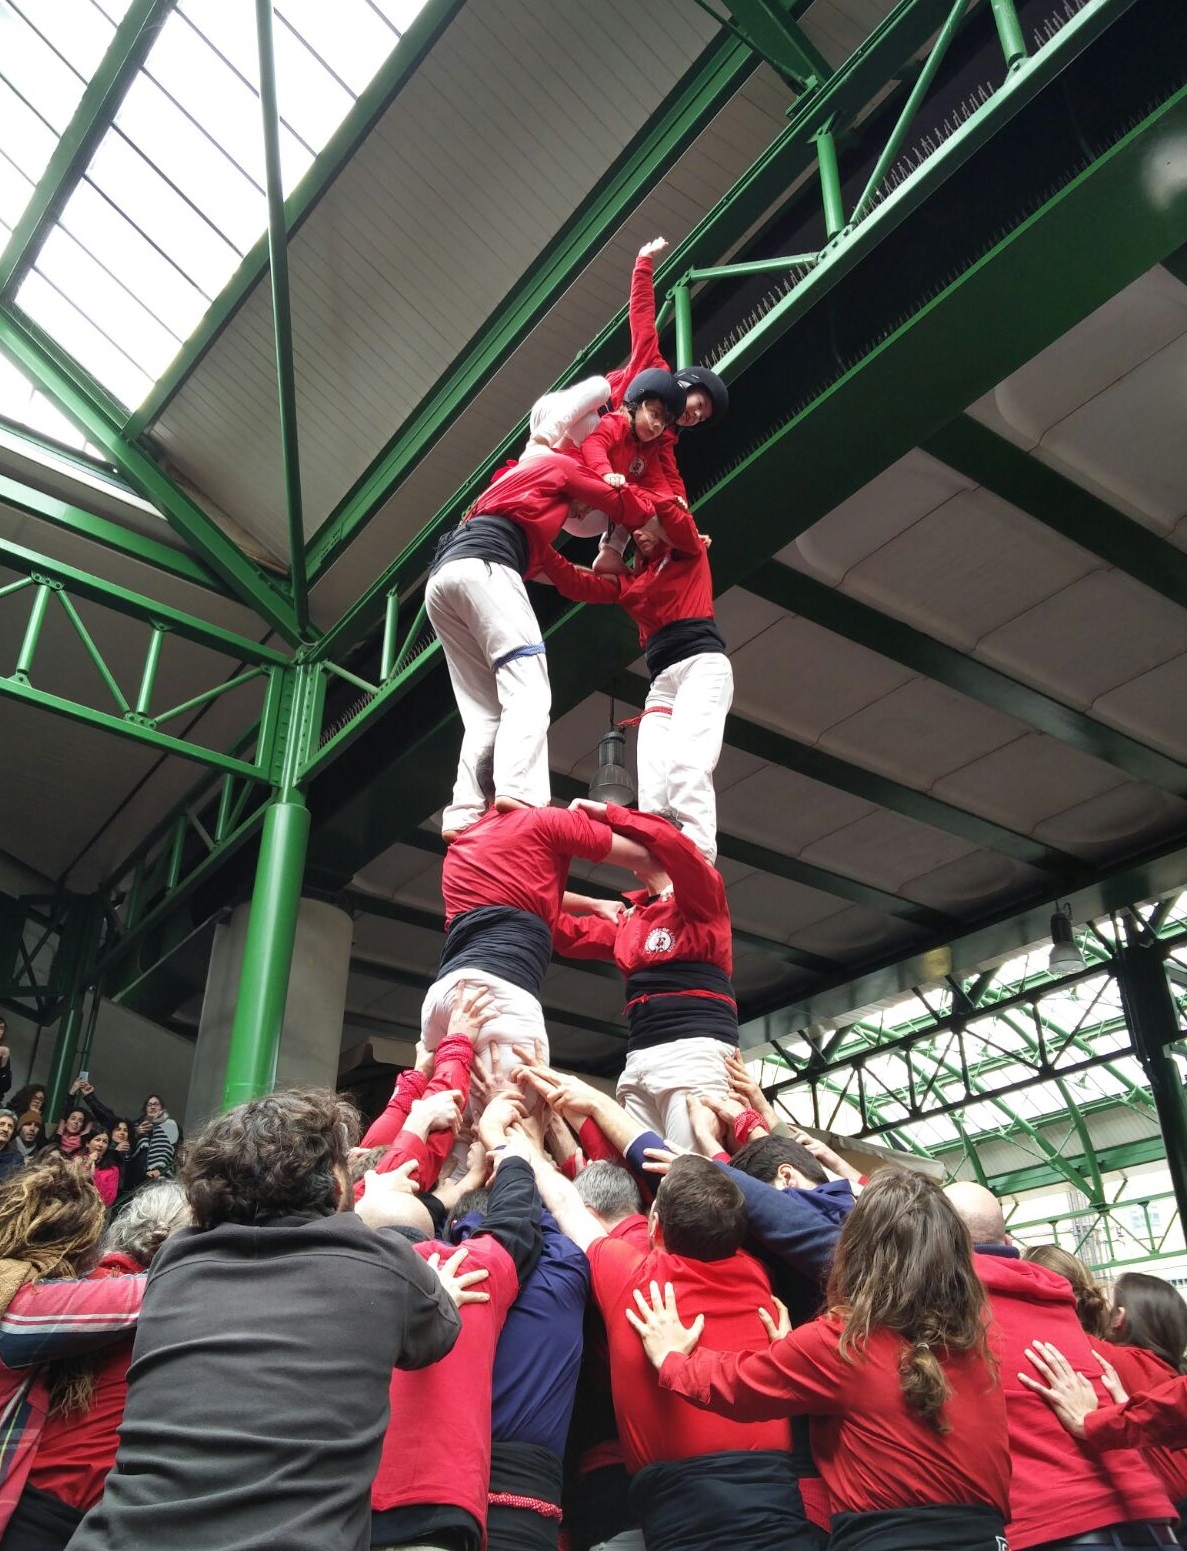 'Castellers of London' performing at London Borough's Market, this April (by ACN)